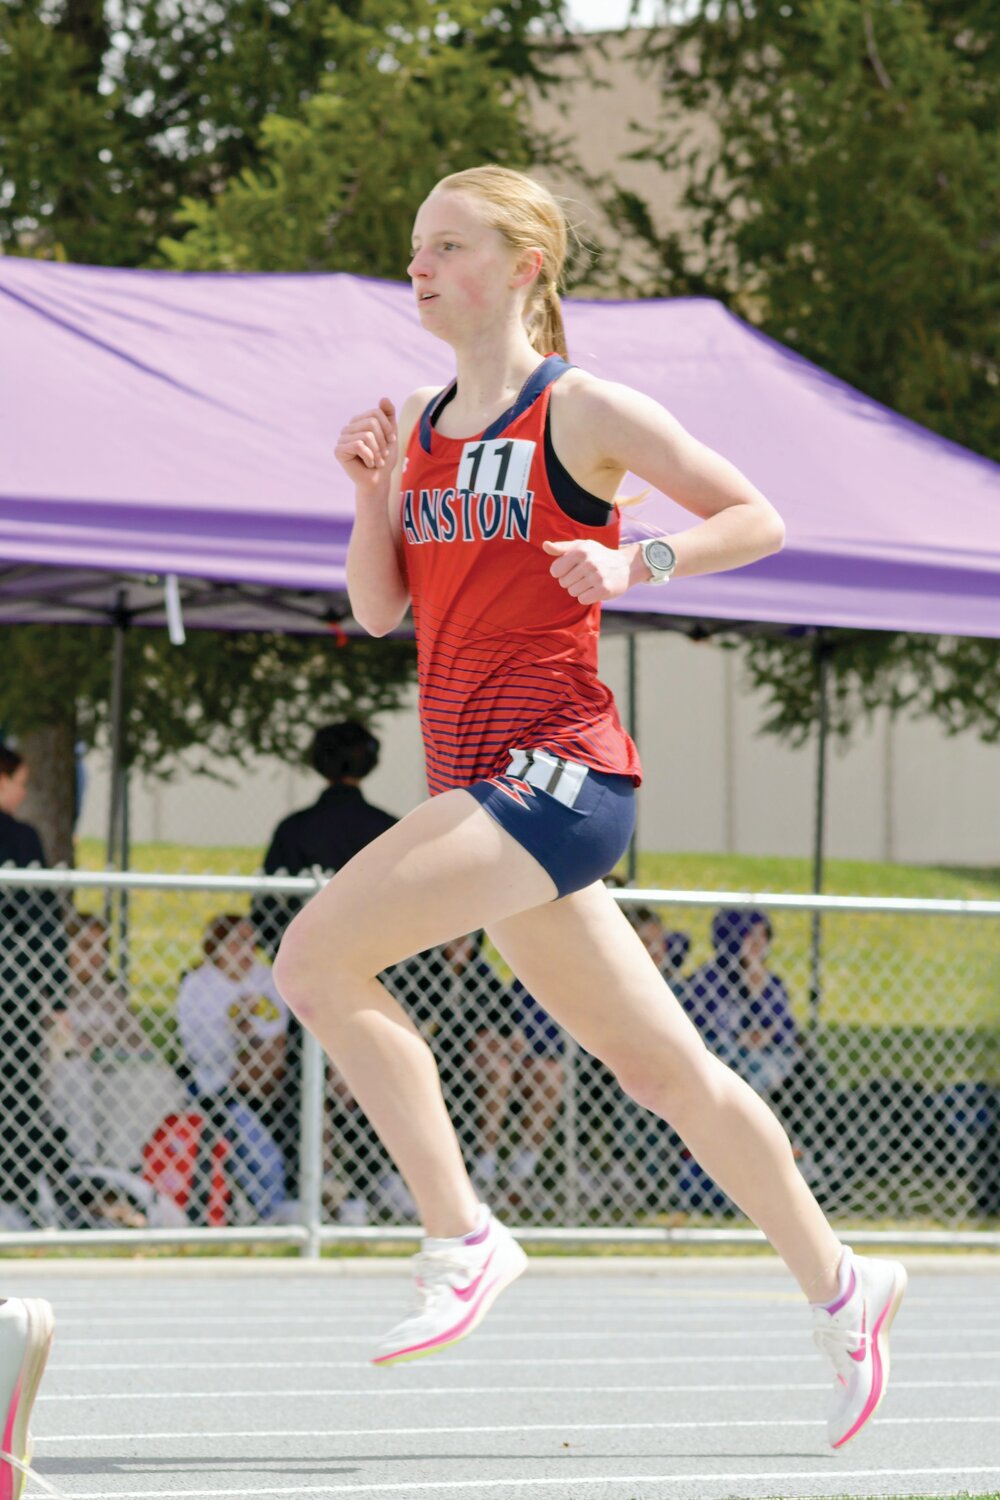 Lady Devil distance runner Jocelyn Capener placed in both the 800 and 1600 meters last week at the Alpha Invite in Orem, Utah.